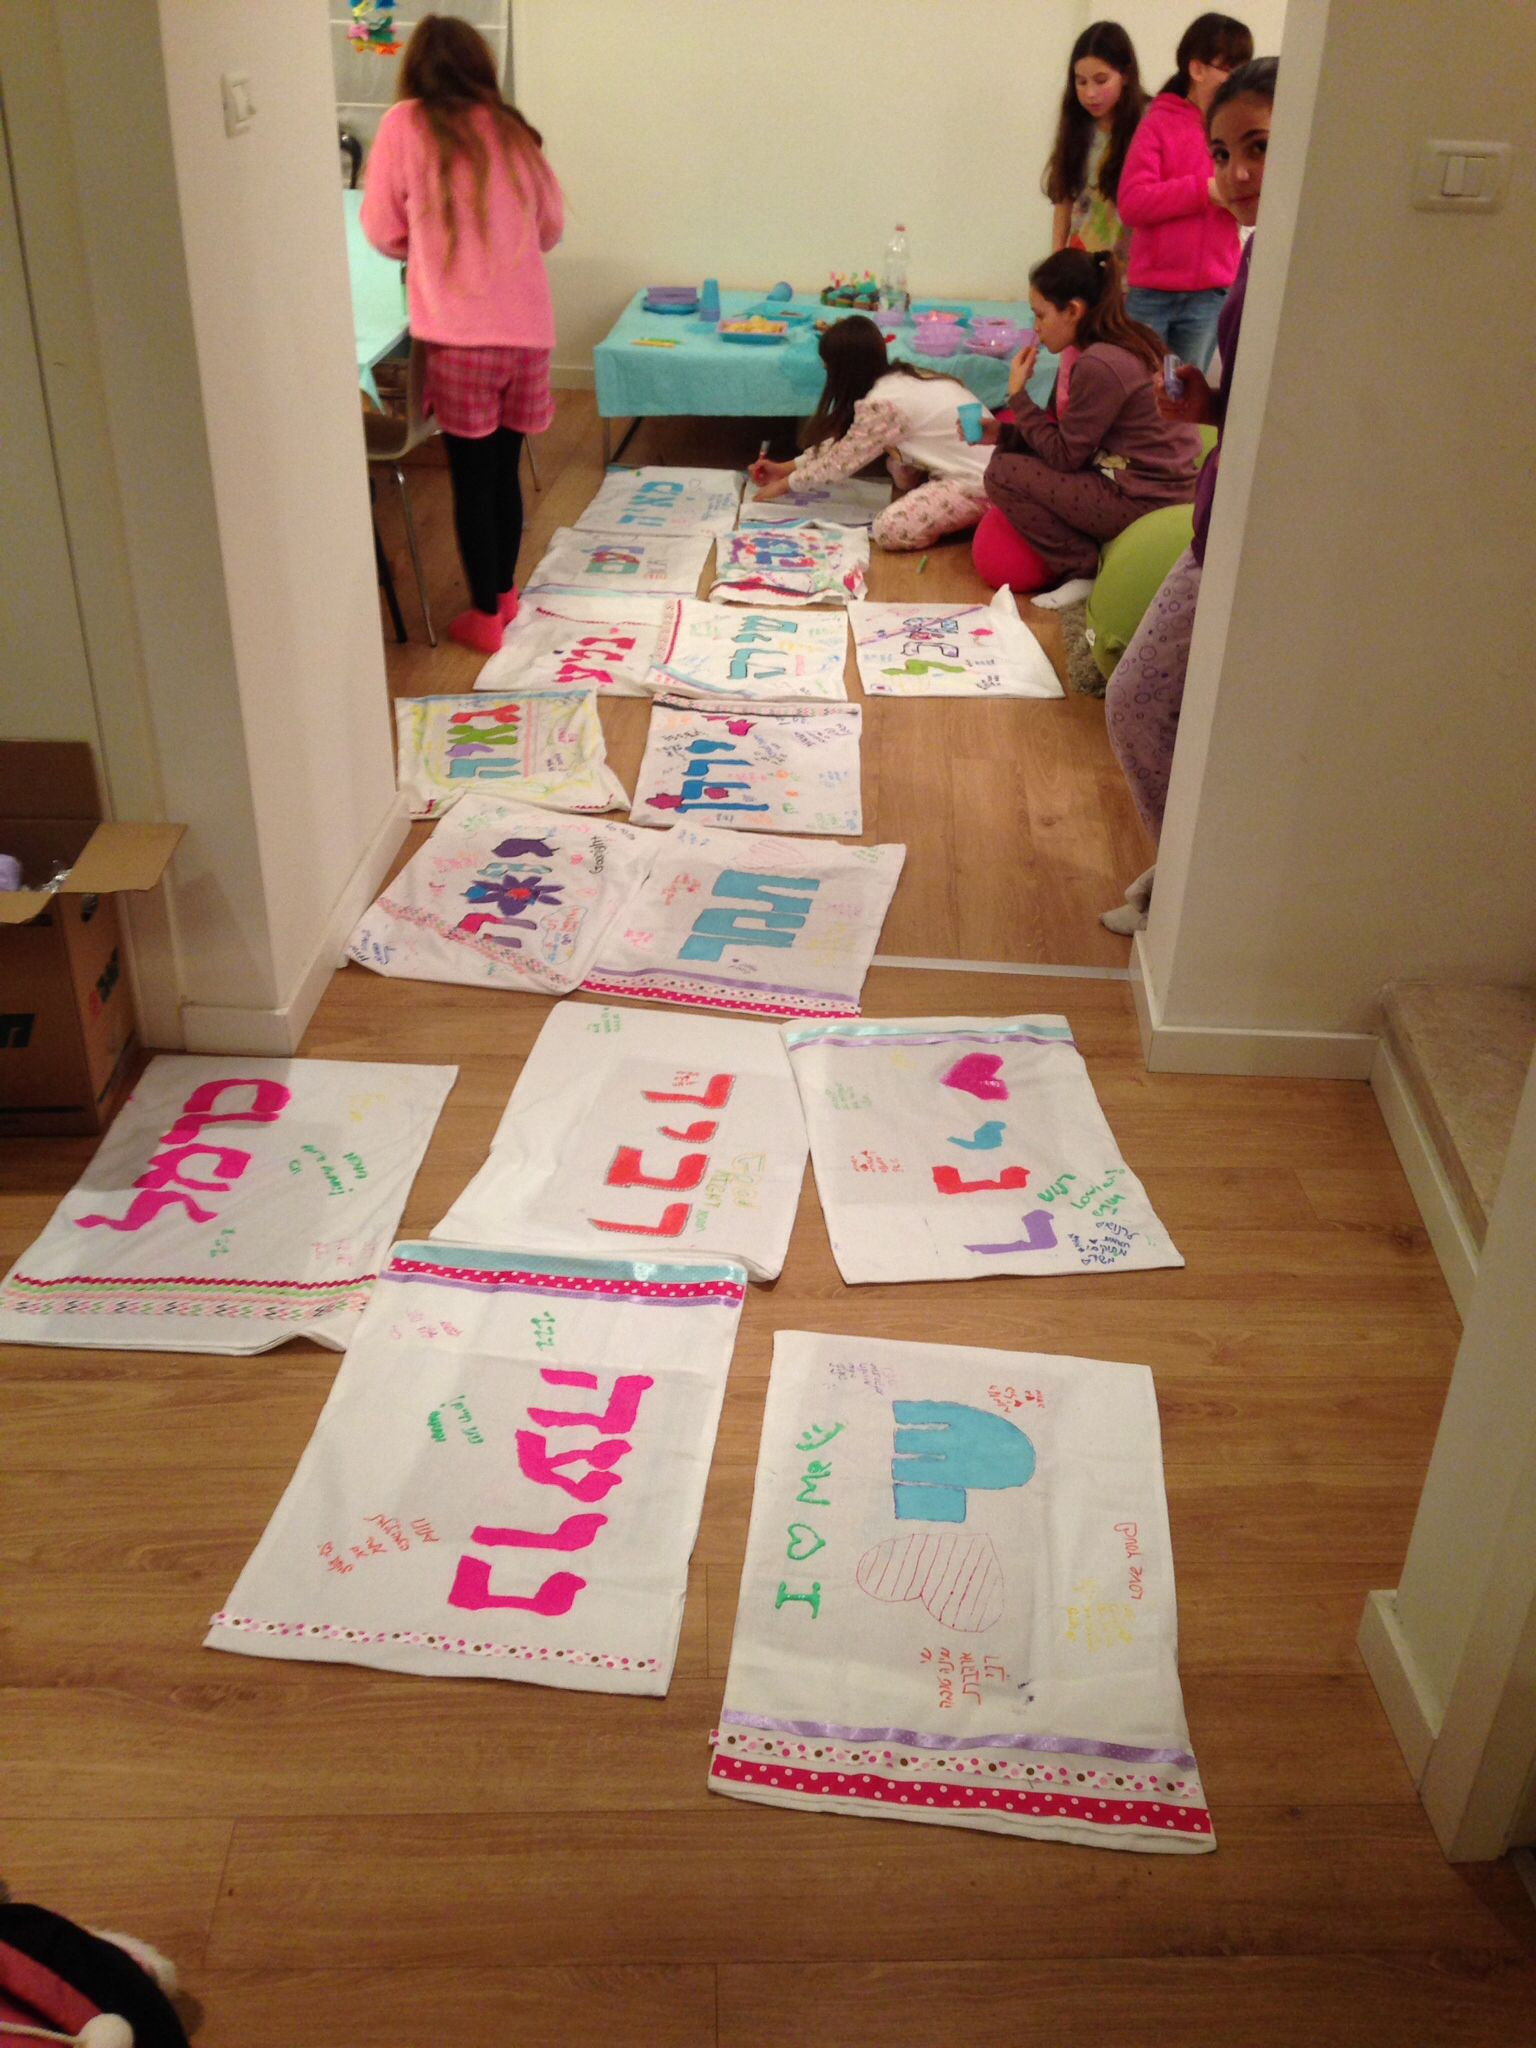 11 Year Old Birthday Party Ideas
 Pillowcase crafts at 11 year old s pyjama party